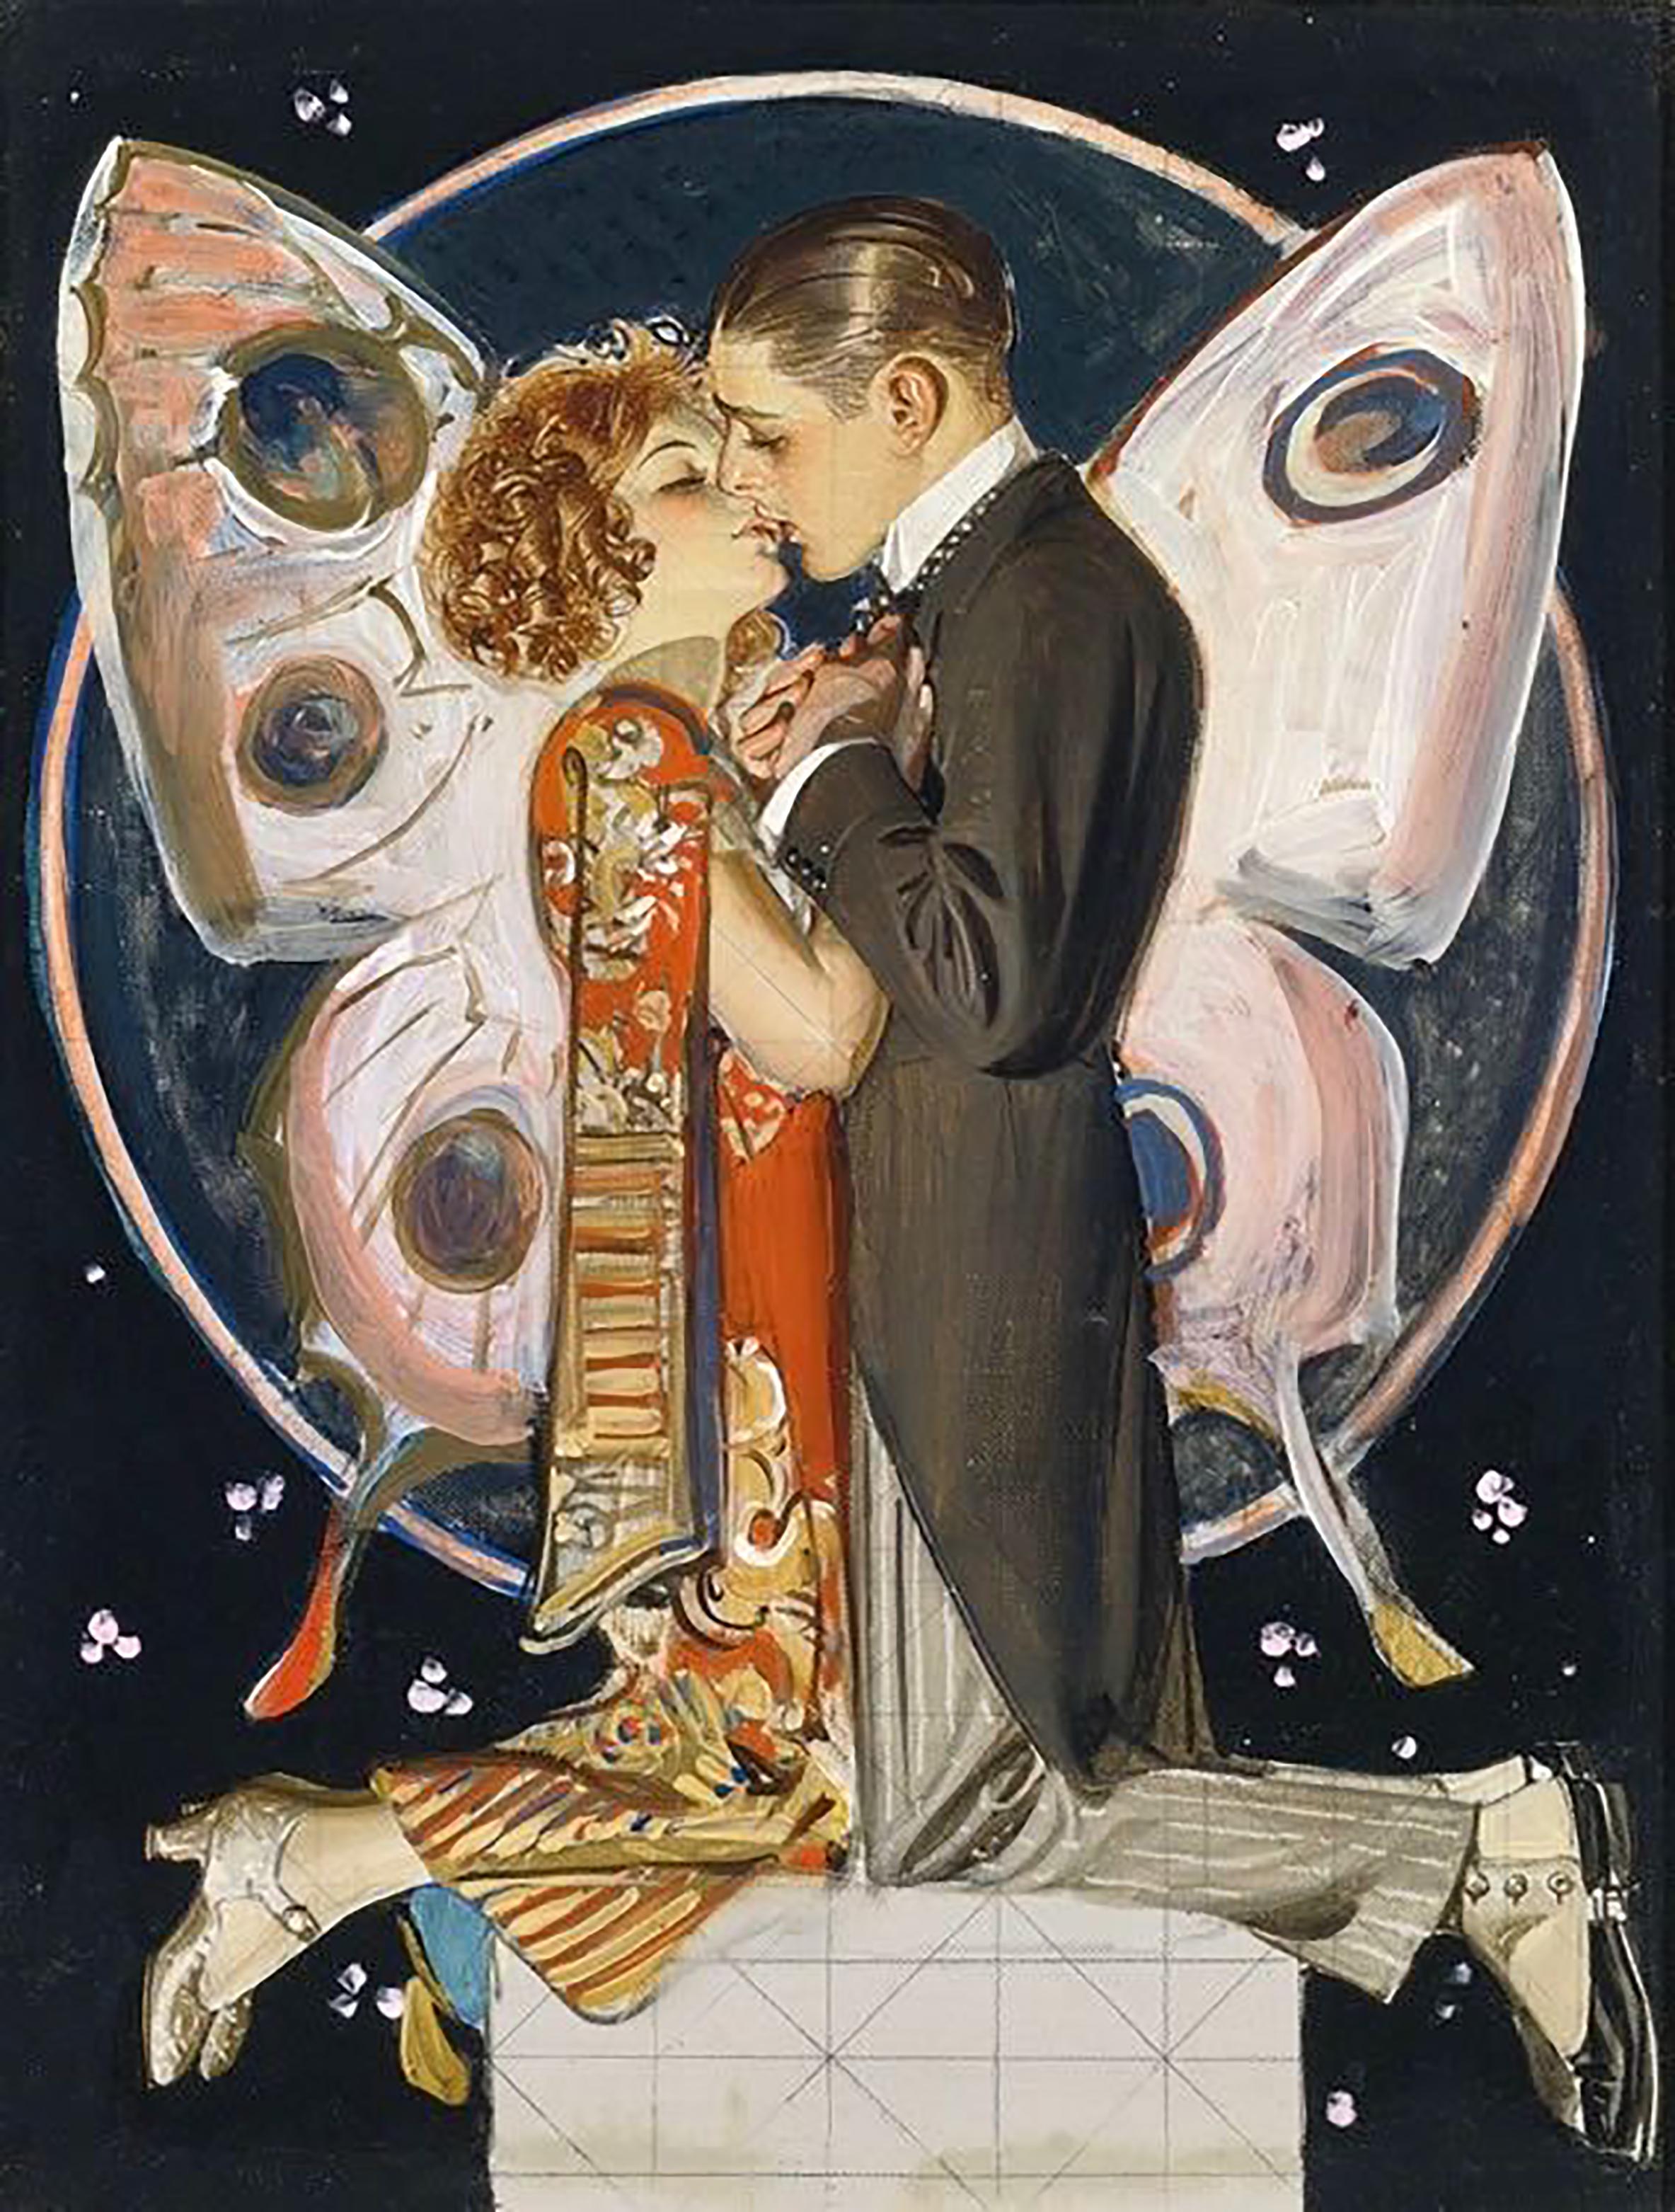 Joseph Christian Leyendecker Figurative Painting - Study for Butterfly Couple 